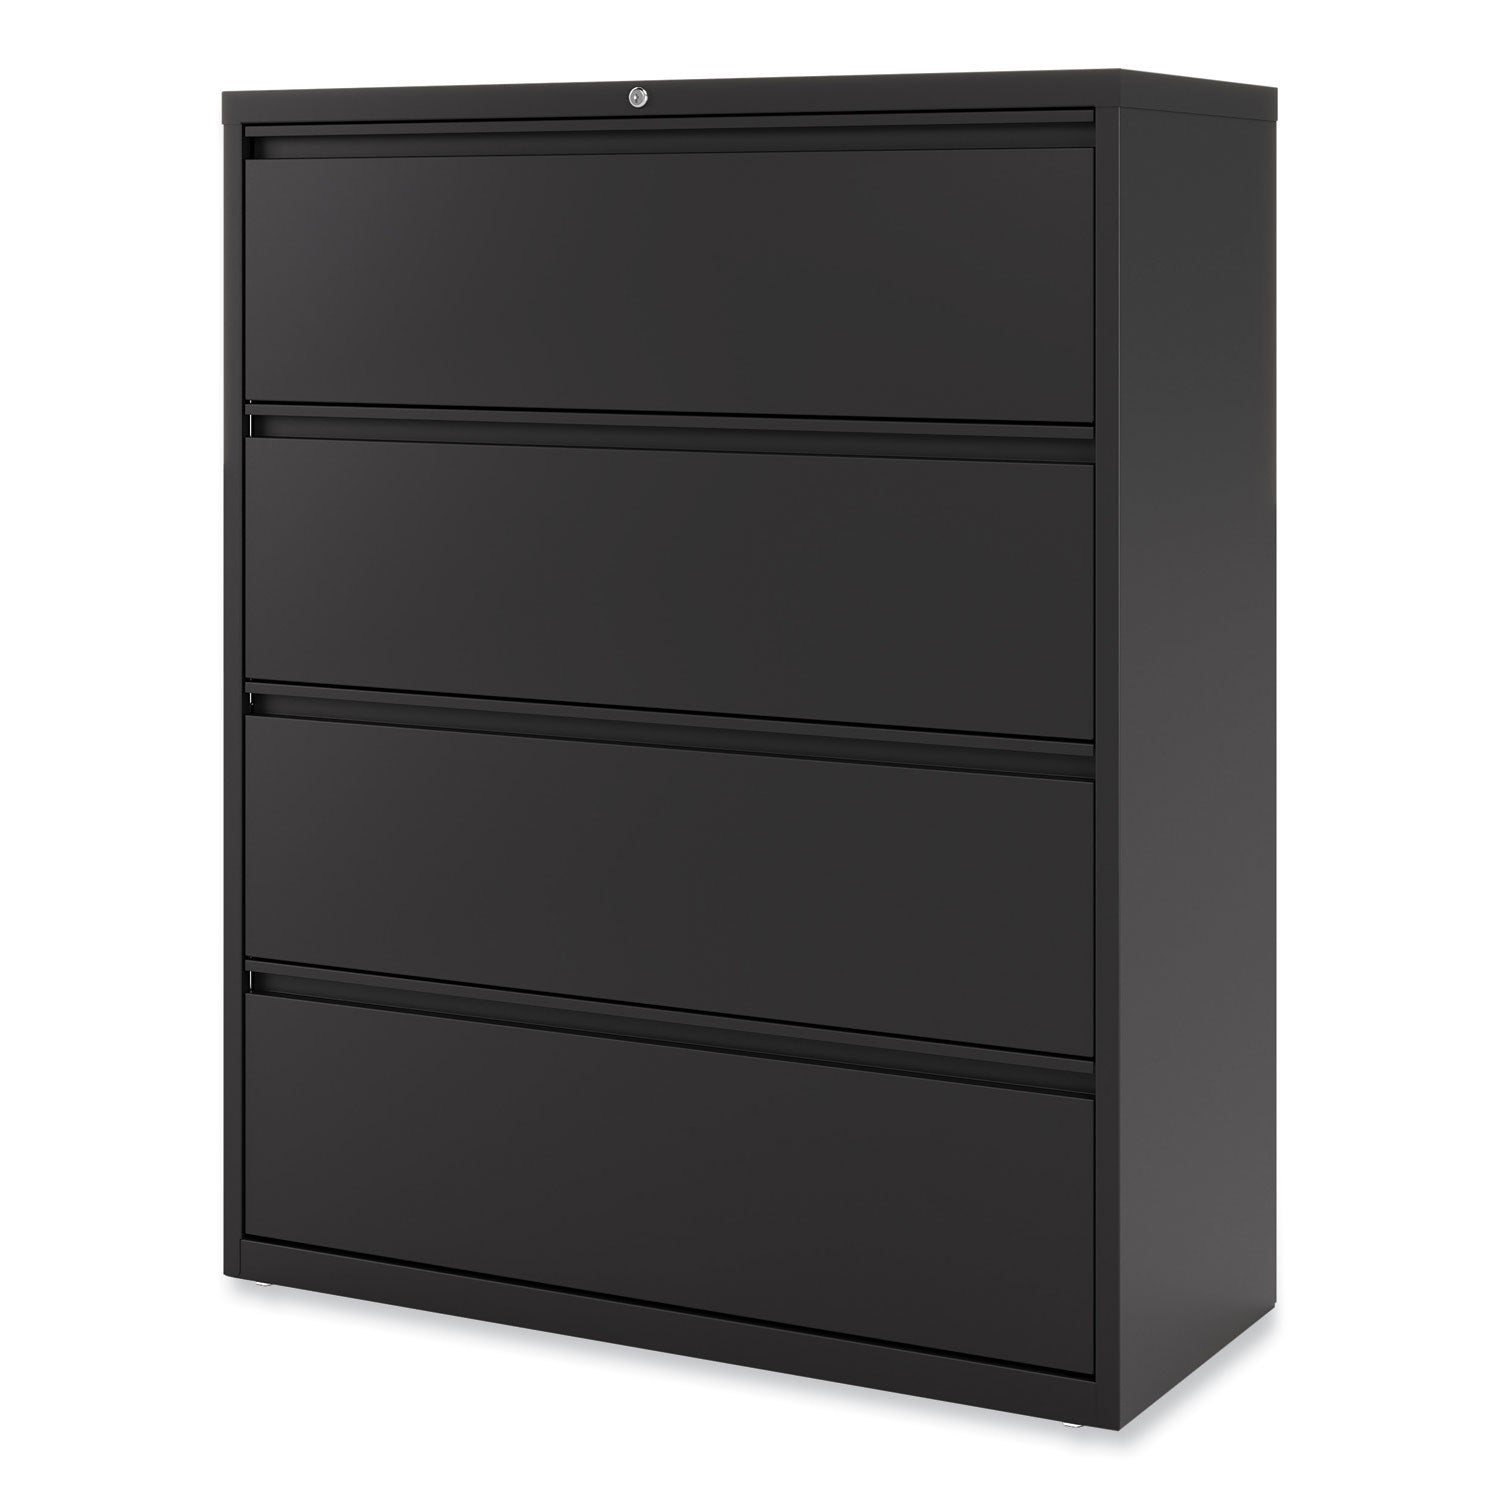 lateral-file-4-legal-letter-size-file-drawers-black-42-x-1863-x-525_alehlf4254bl - 8